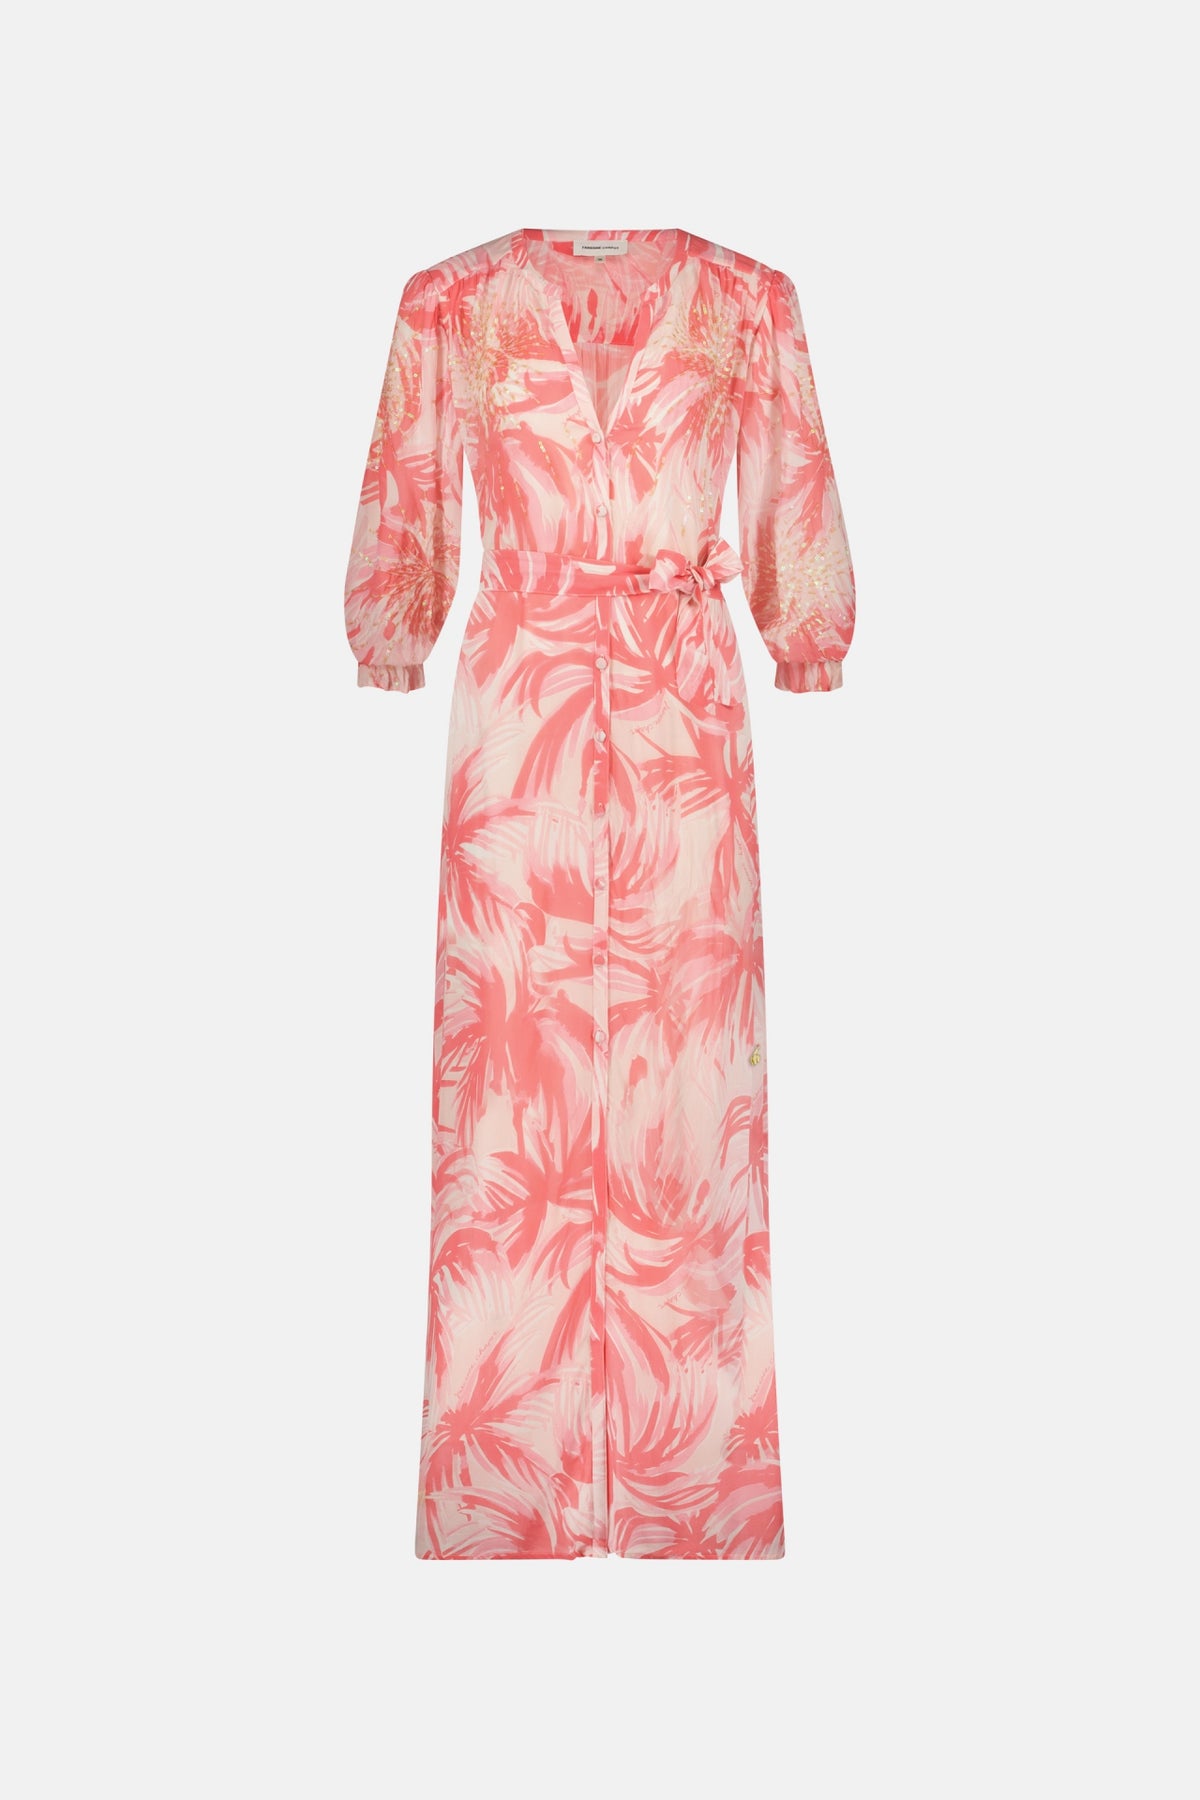 Pink blush and coral tropical floral print maxi shirt dress with elbow length sleeves with iridescent sequin bursts on the upper bodice and sleeves